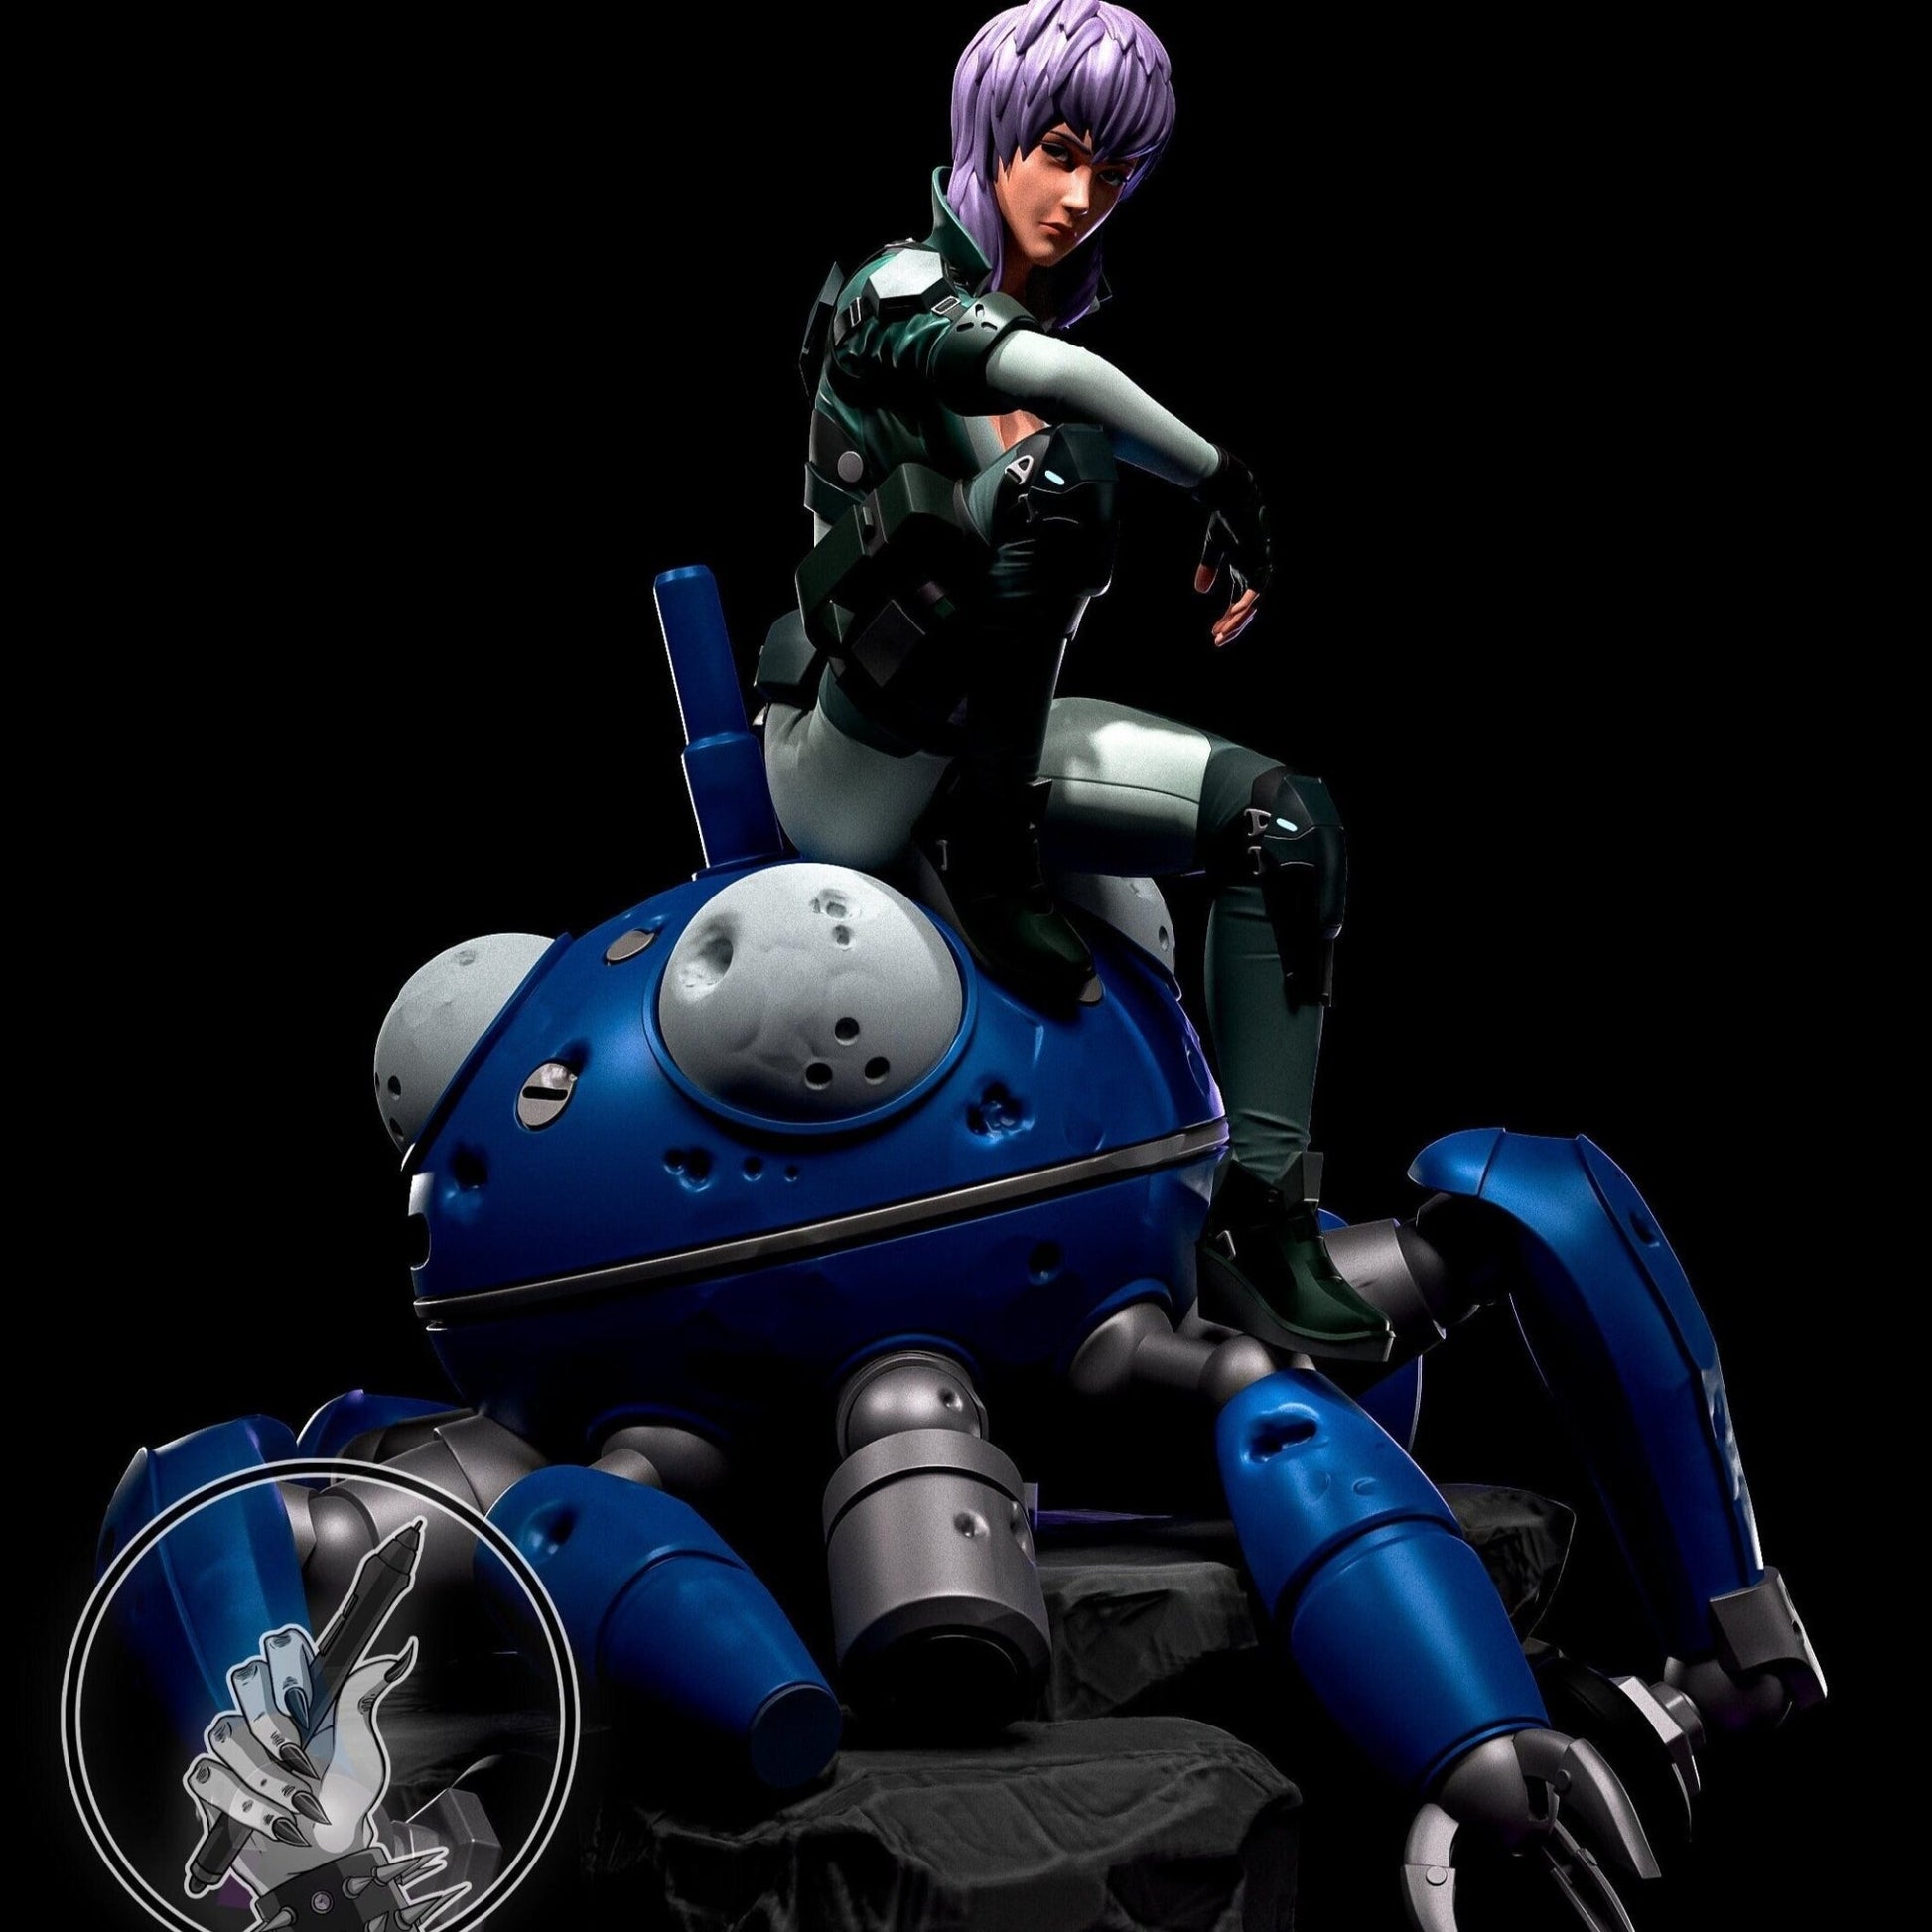 Motoko Kusanagi 3D printed miniatures figurines collectibles and scale models UNPAINTED Fun Art by h3LL creator